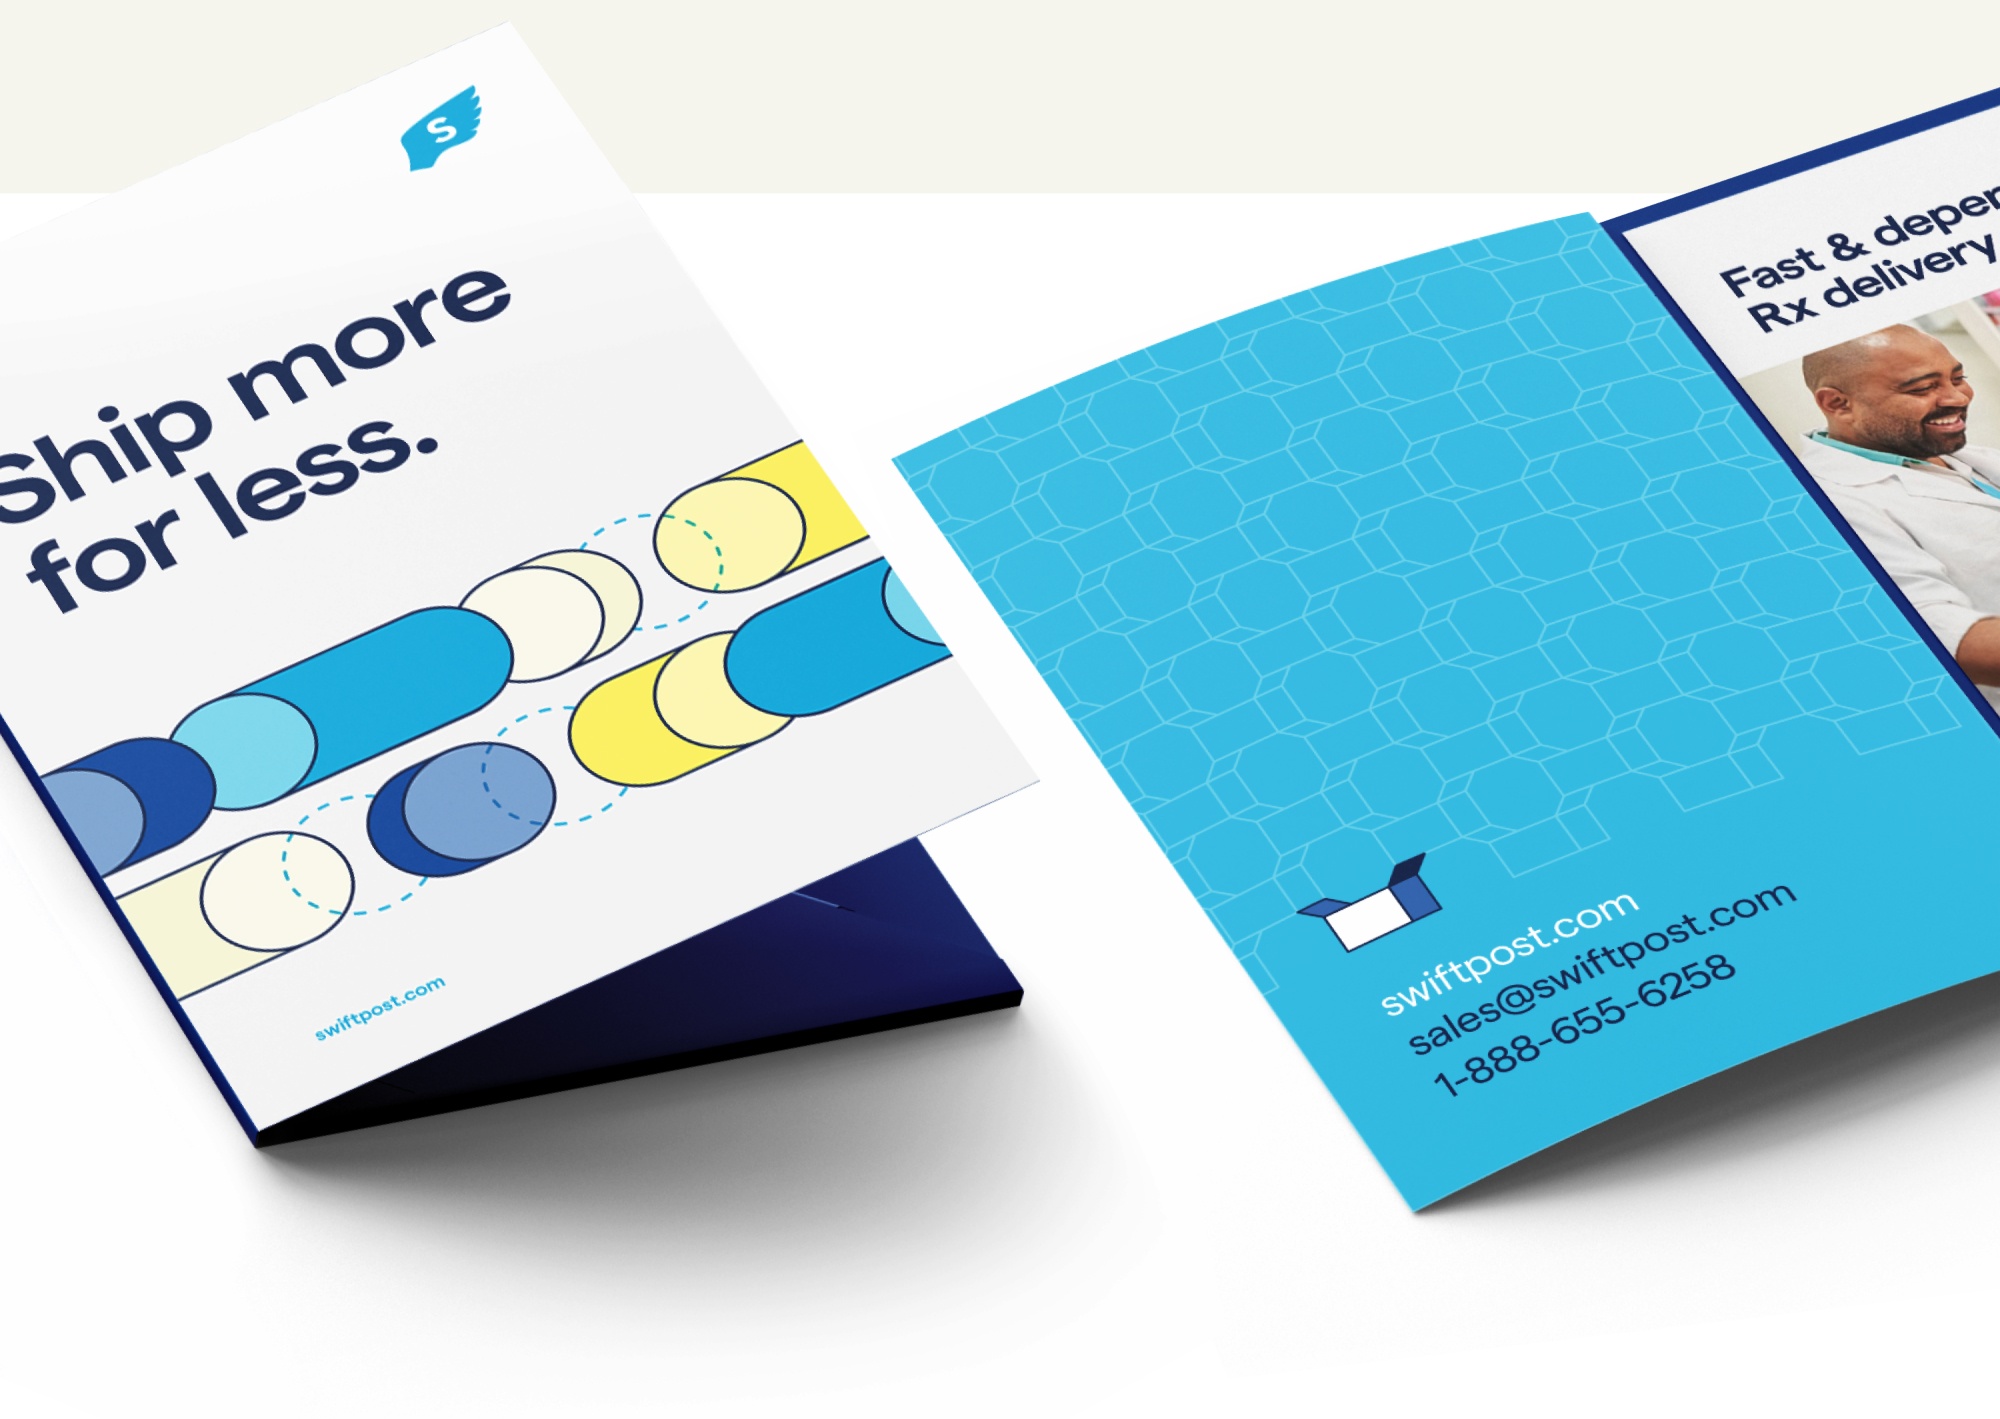 Branded marketing collateral (folders and print design) for Swiftpost